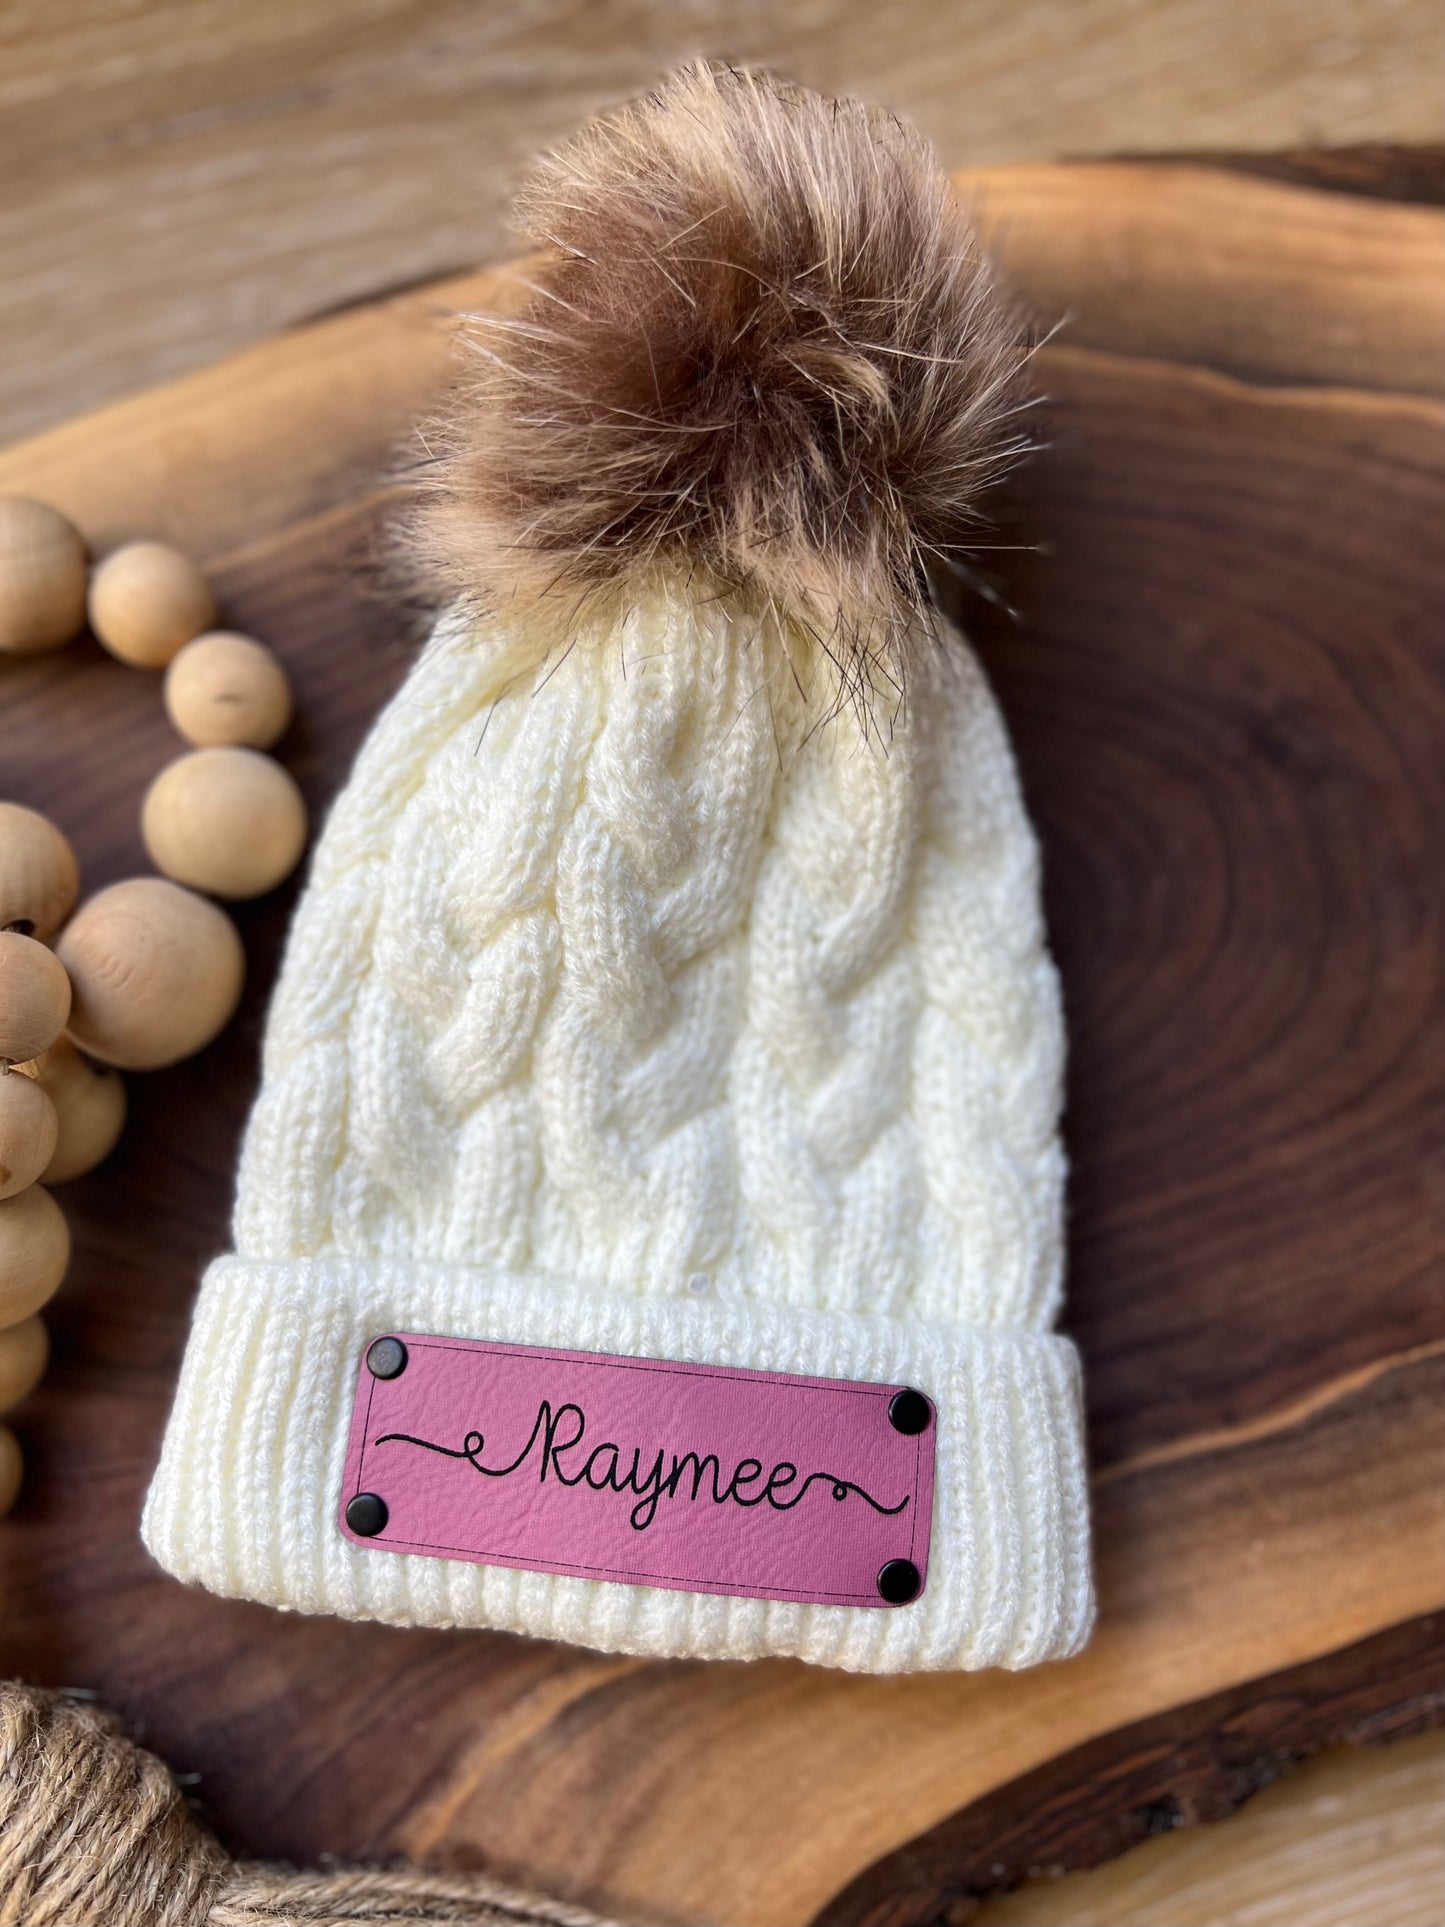 Personalized Monogram Cable Knit Hat